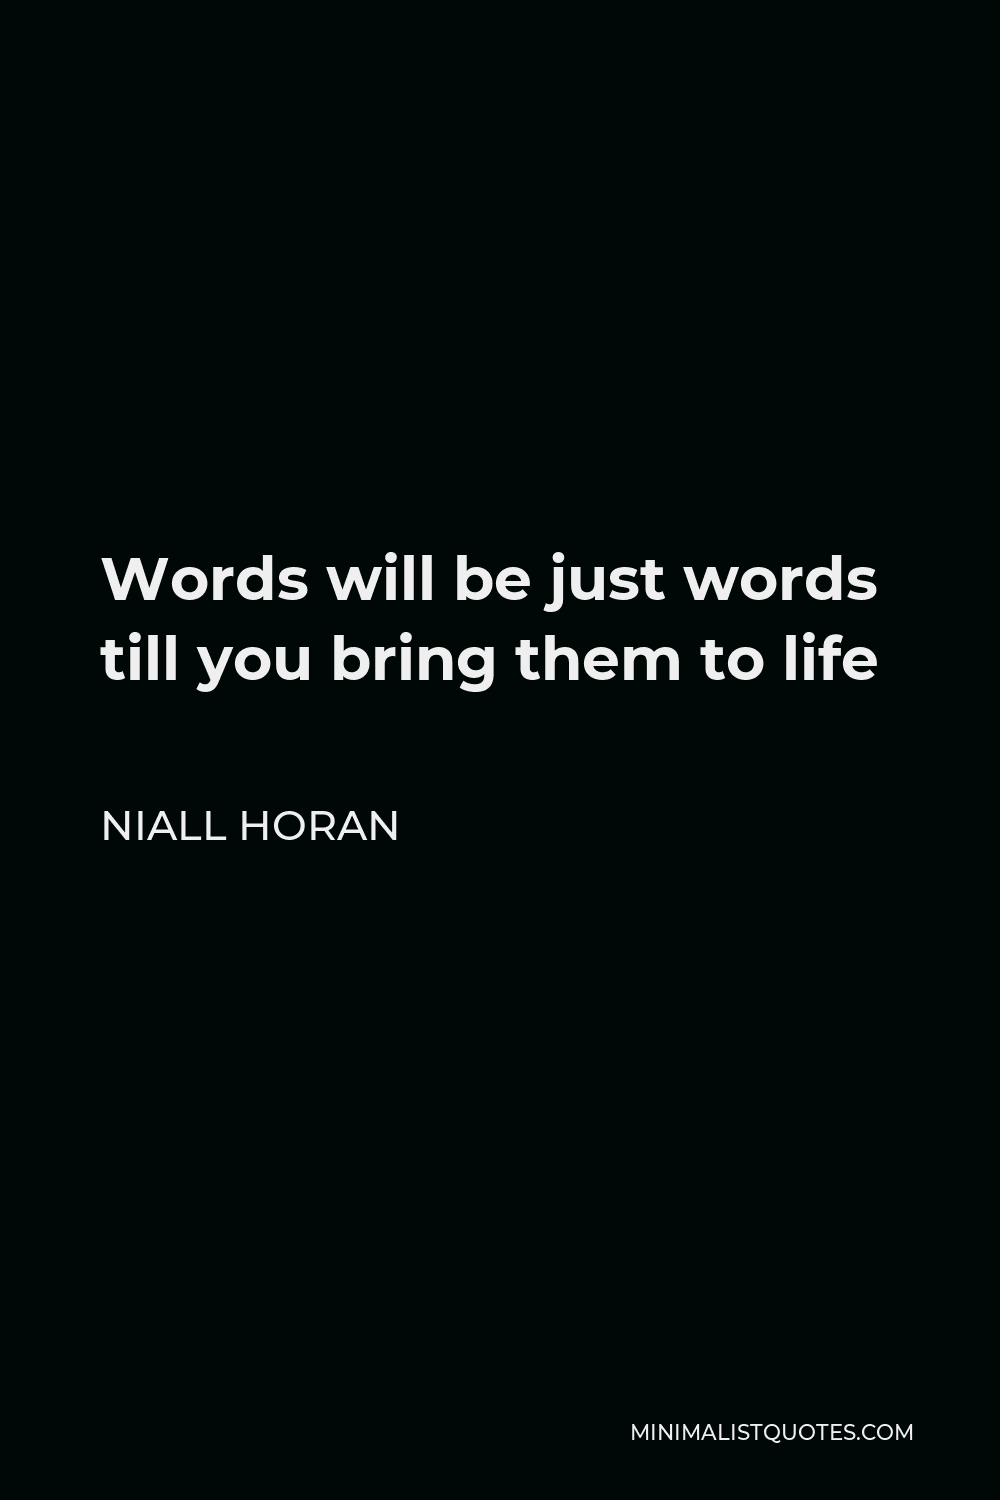 Niall Horan Quote - Words will be just words till you bring them to life